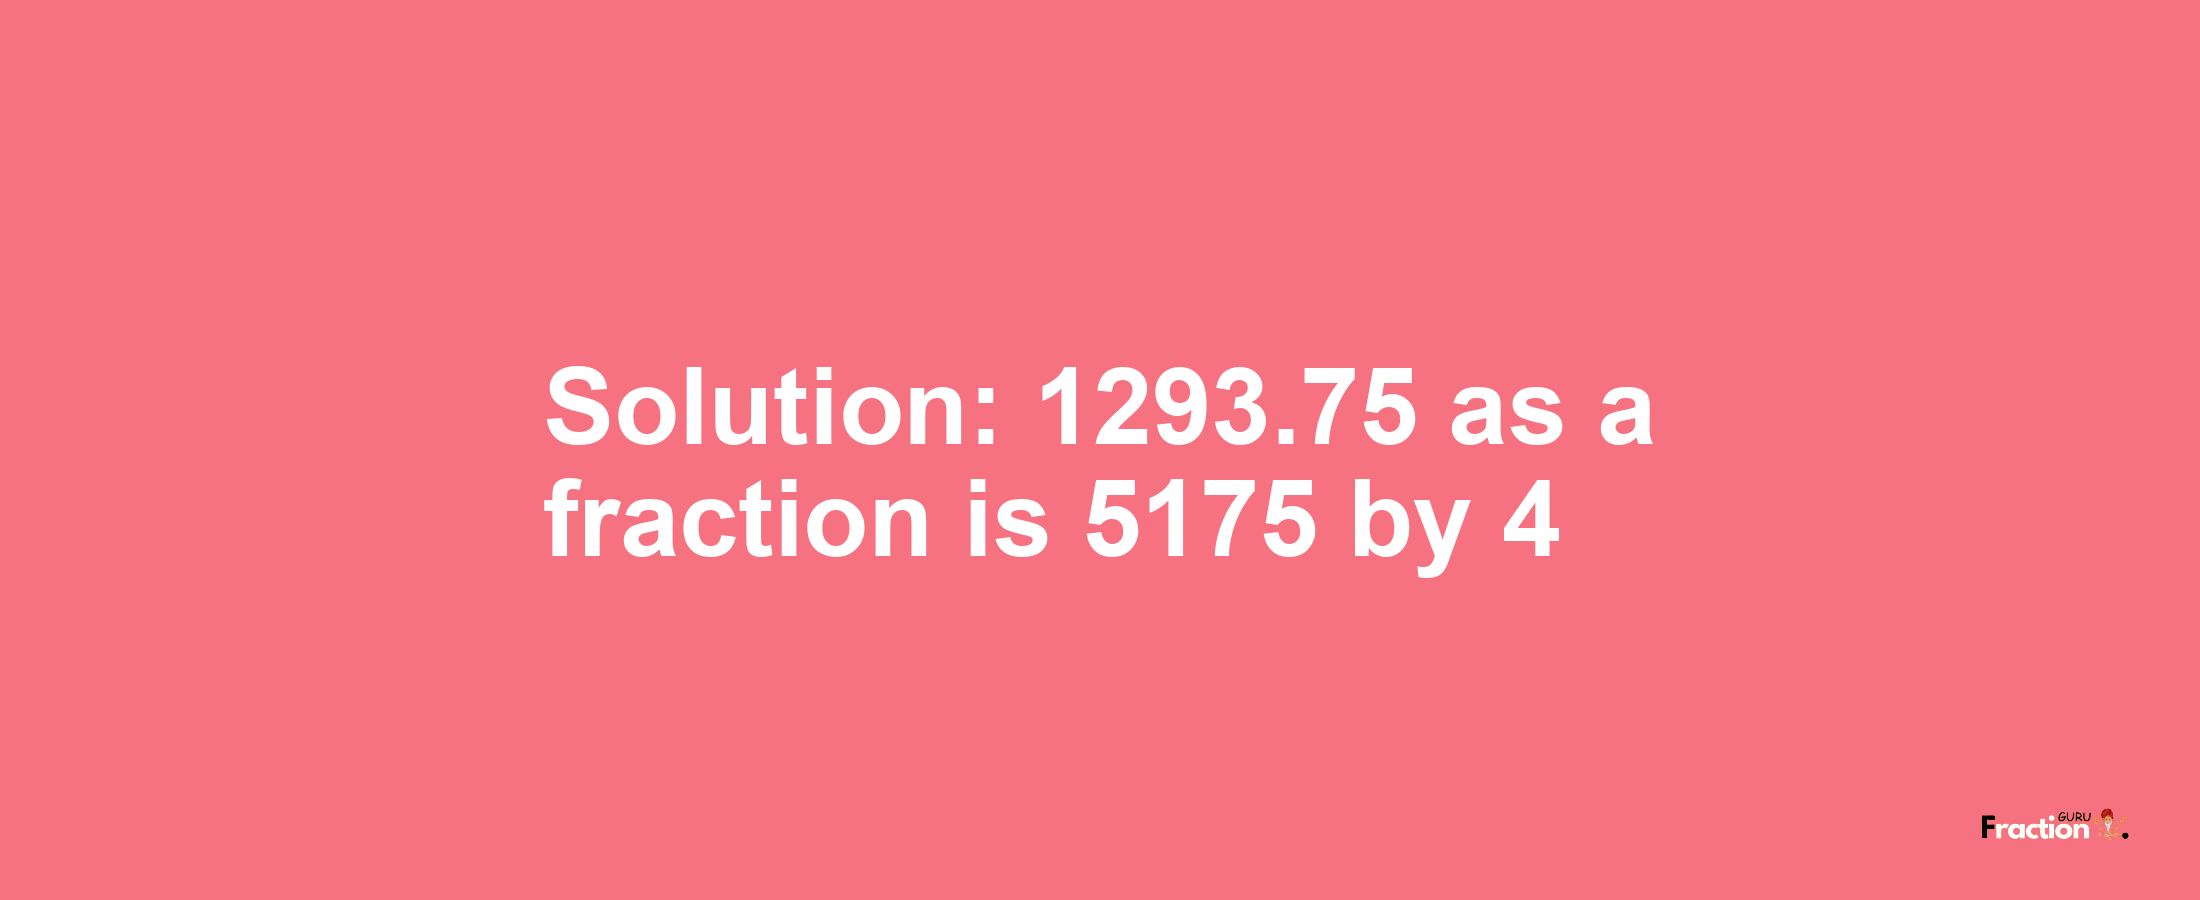 Solution:1293.75 as a fraction is 5175/4